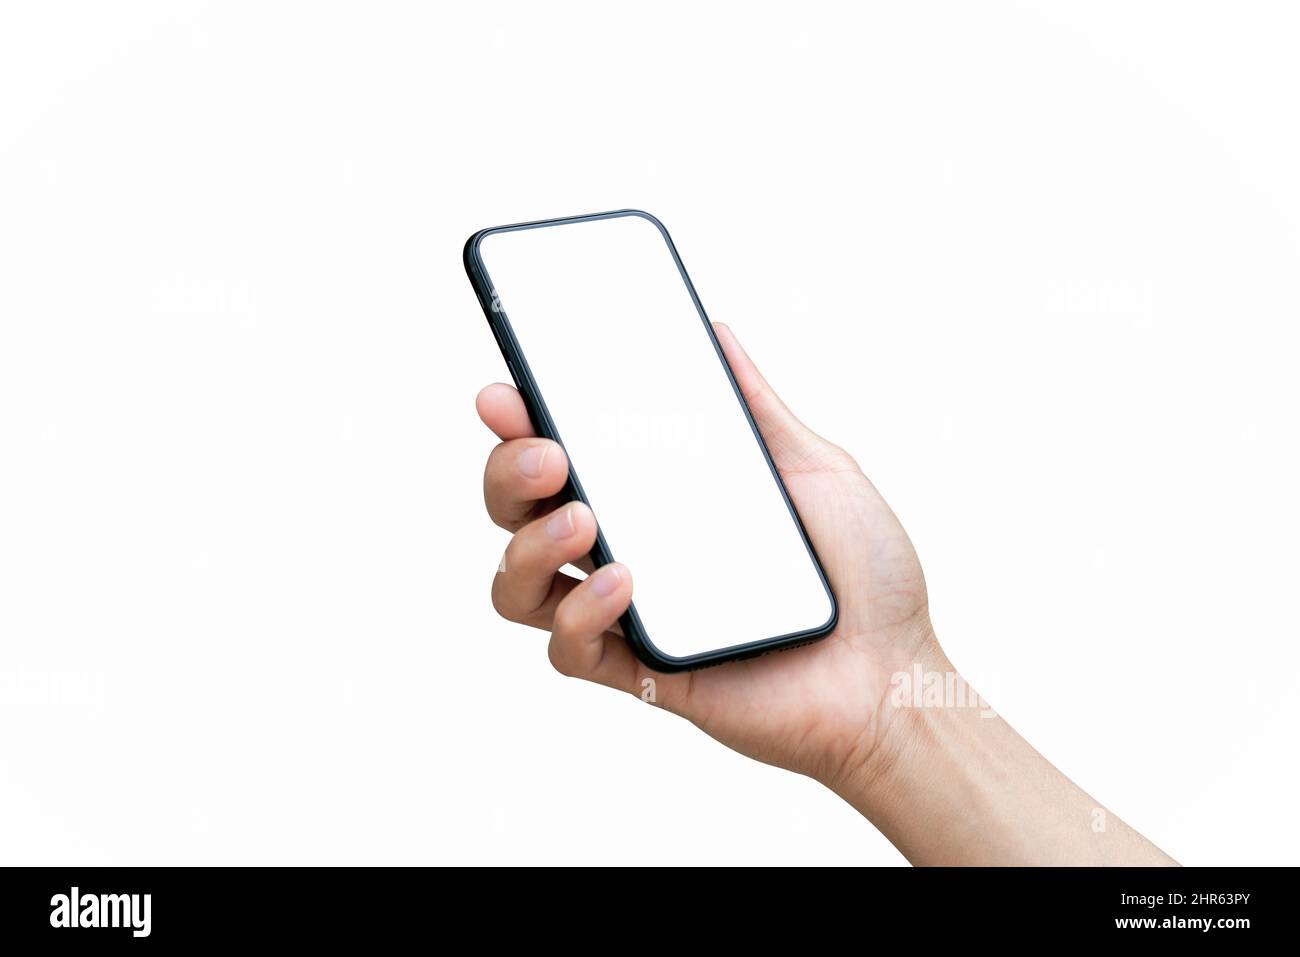 Male hand holding smartphone with blank screen isolated on white background. Stock Photo